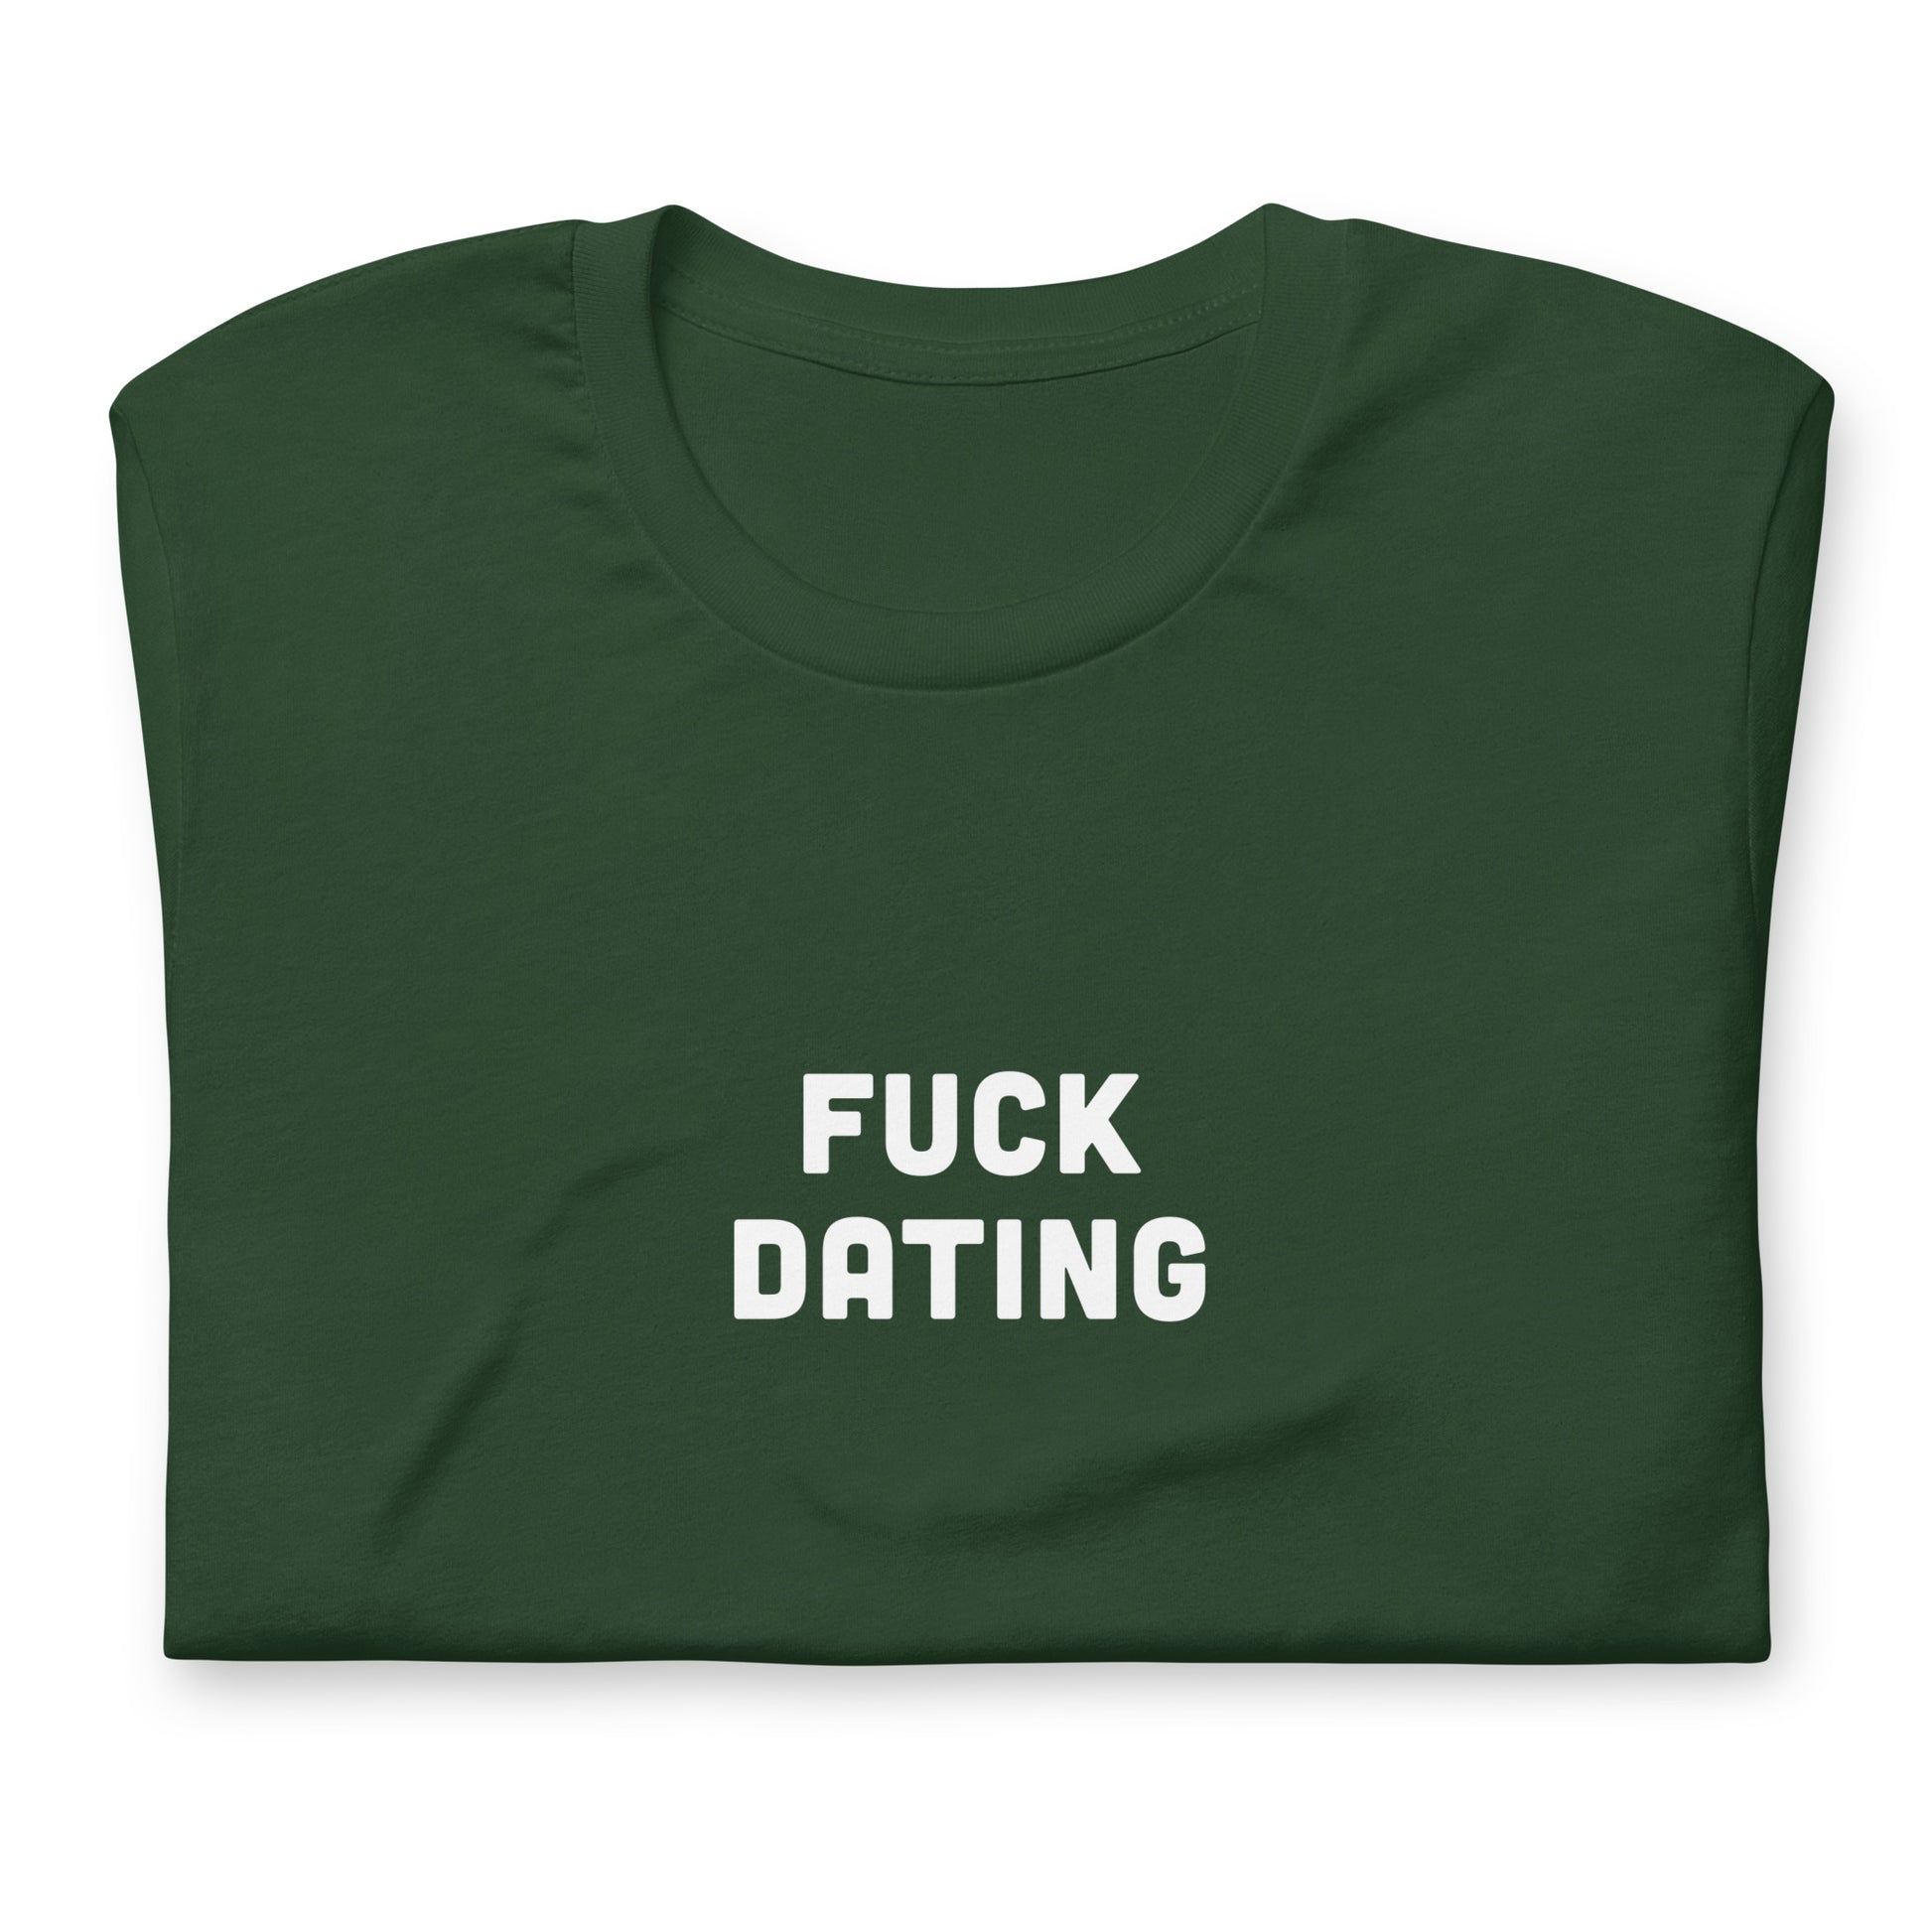 Fuck Dating T-Shirt Size 2XL Color Black